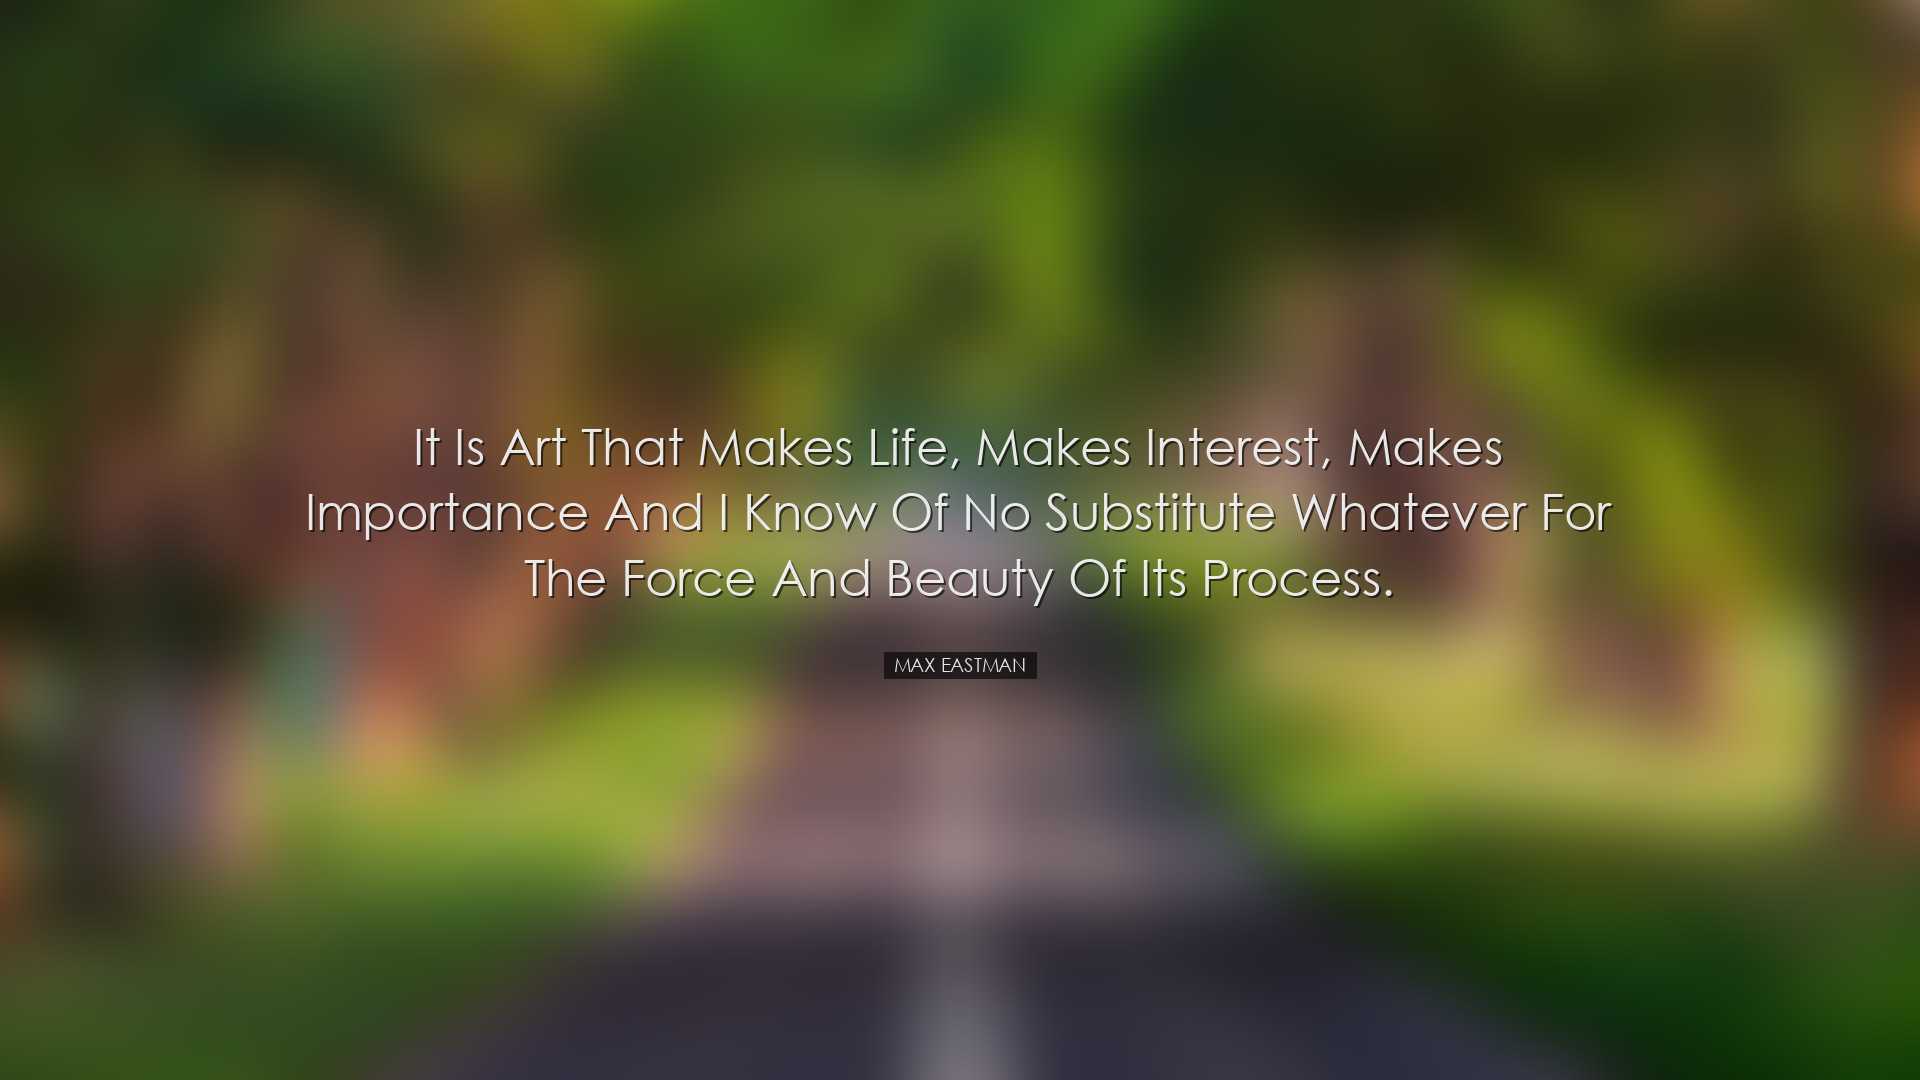 It is art that makes life, makes interest, makes importance and I